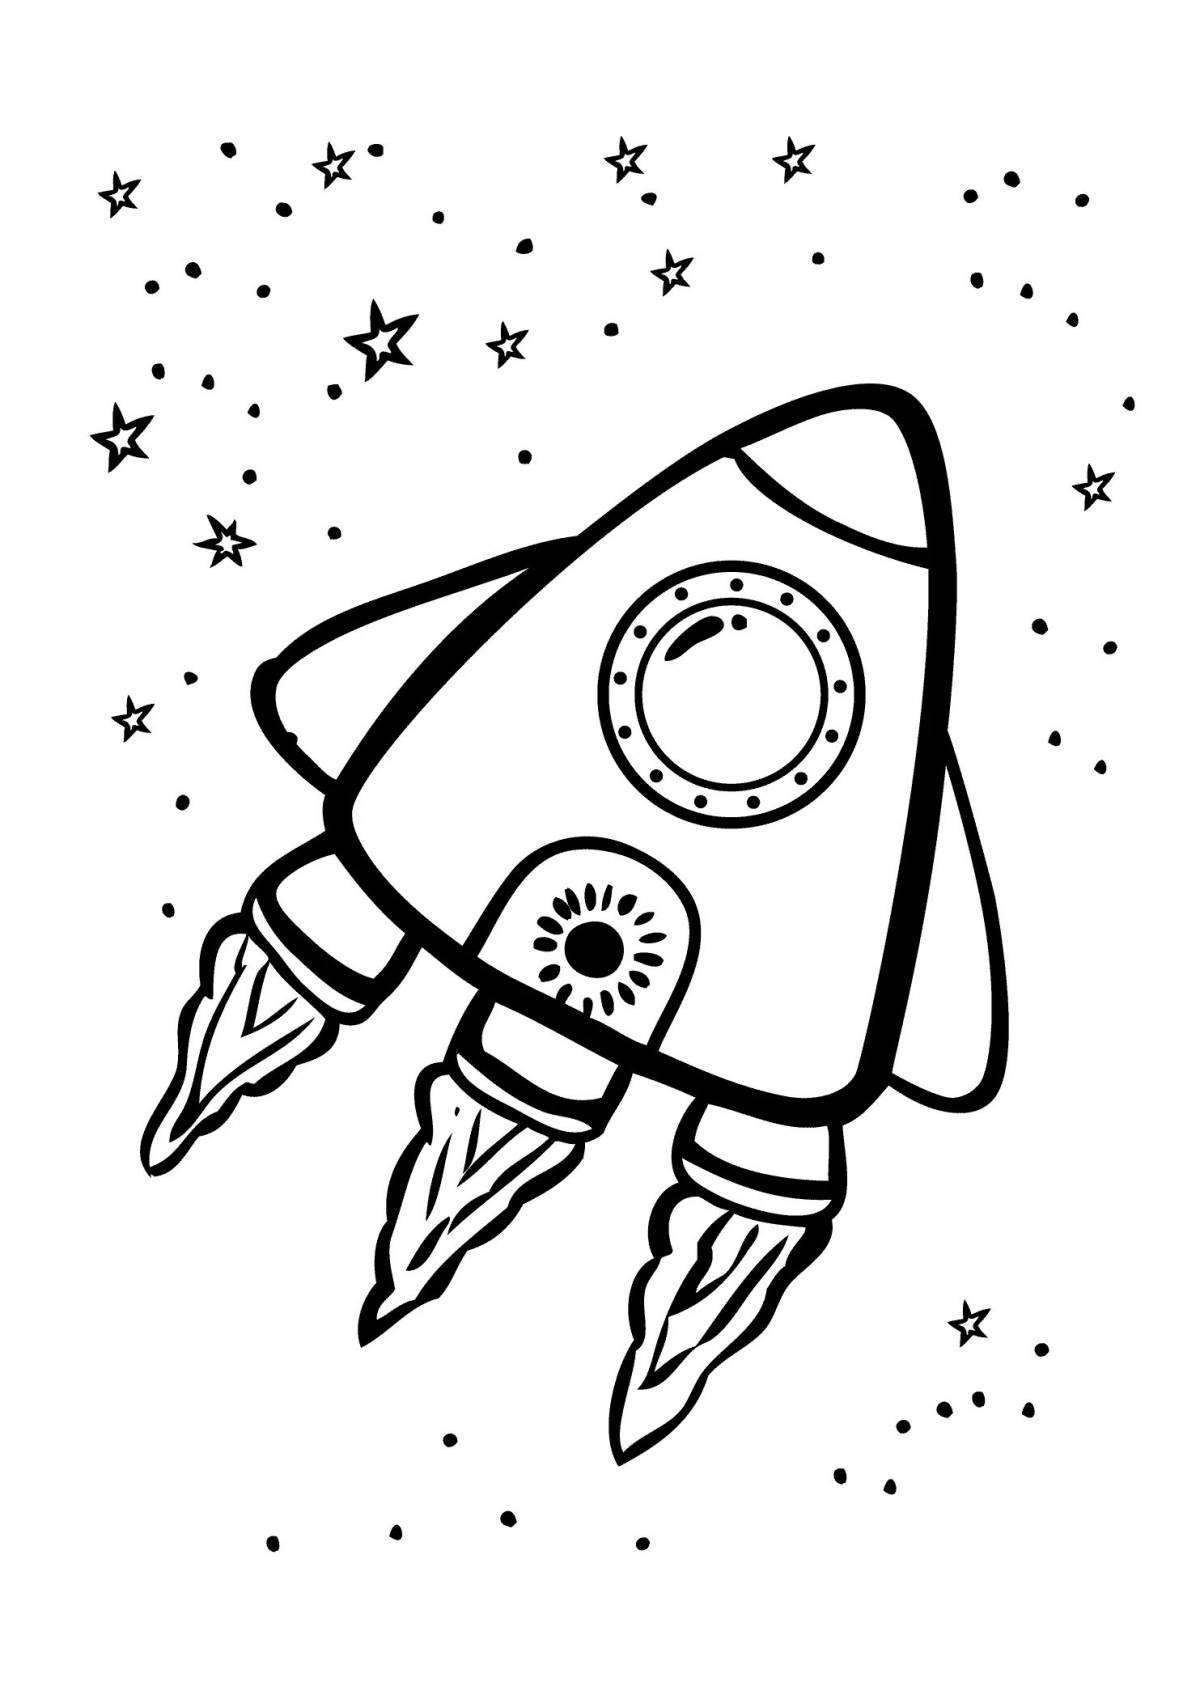 Incredible space coloring book for kids